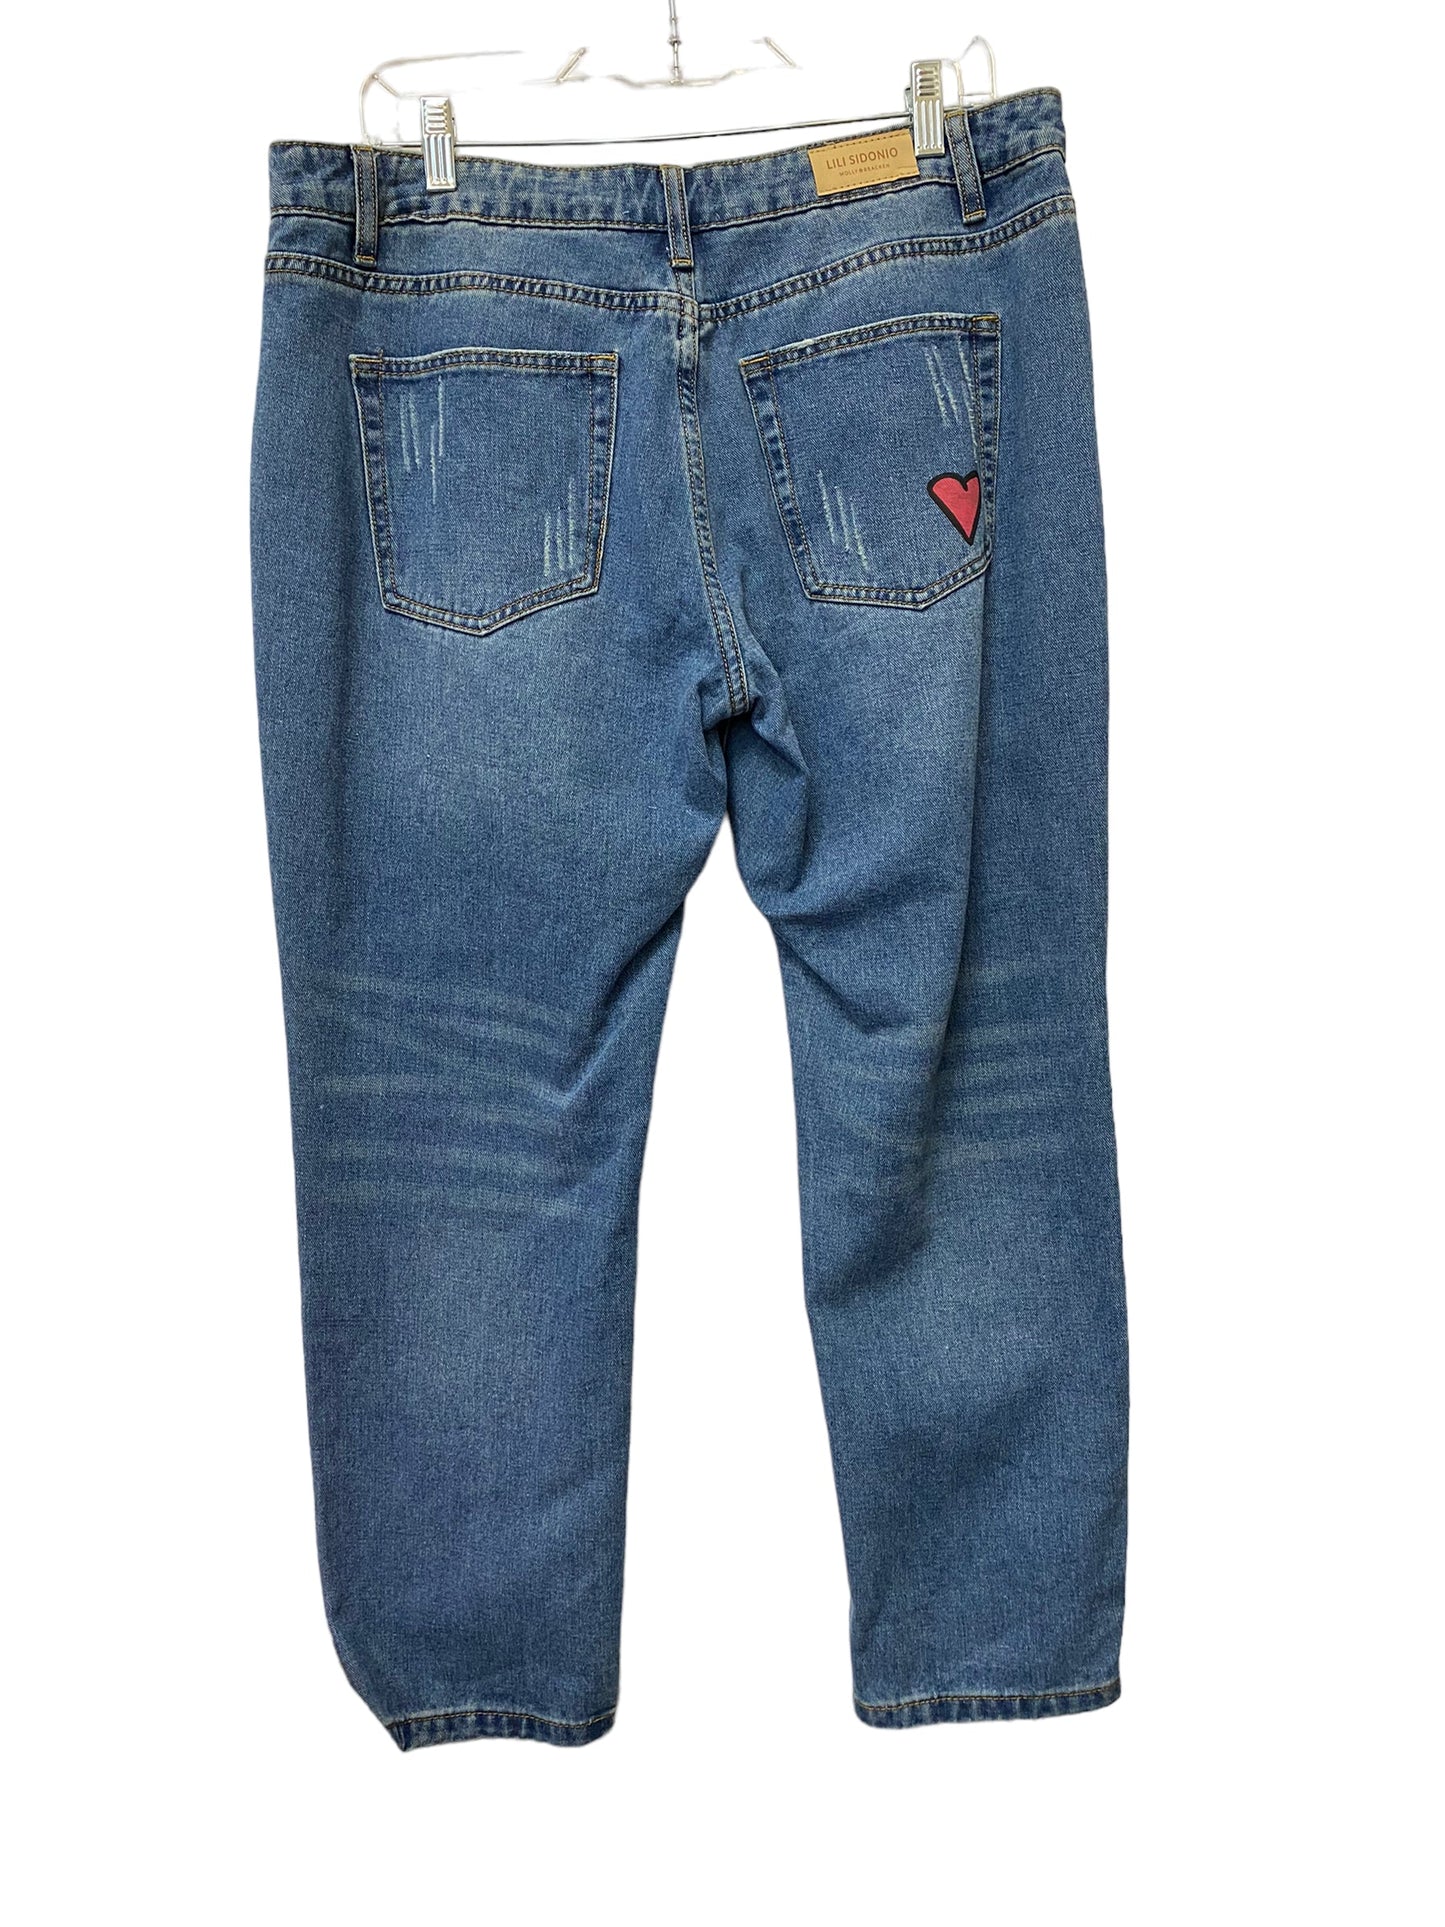 Jeans Straight By Clothes Mentor  Size: M